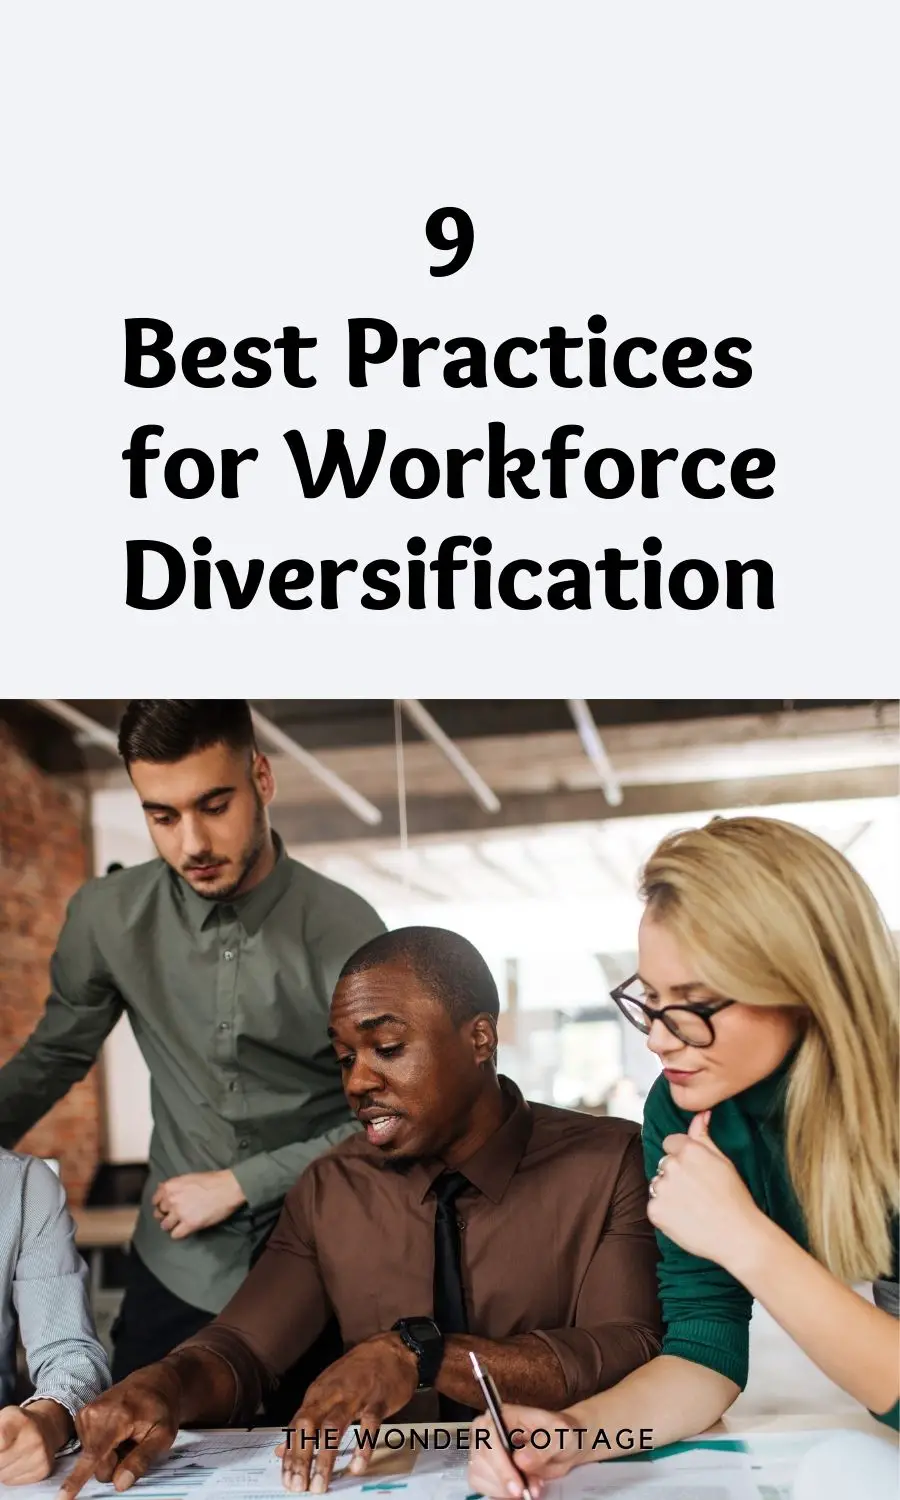 9 best practices to promote workforce diversification